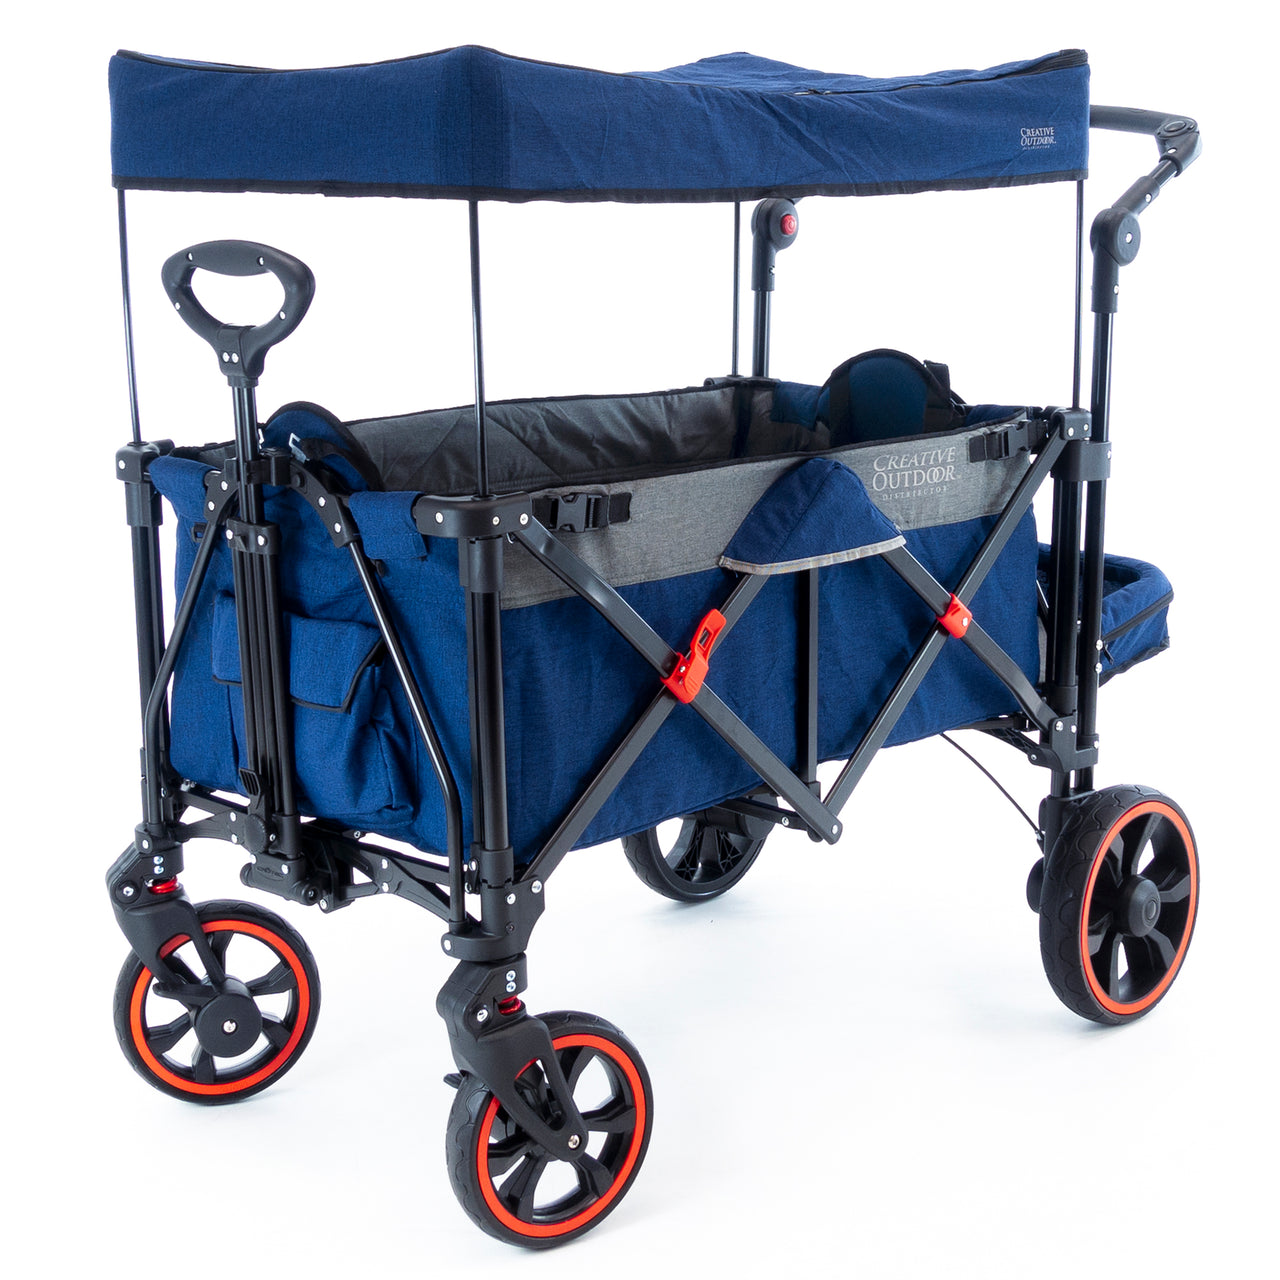 push-pull-folding-stroller-wagon-with-canopy-navy-blue